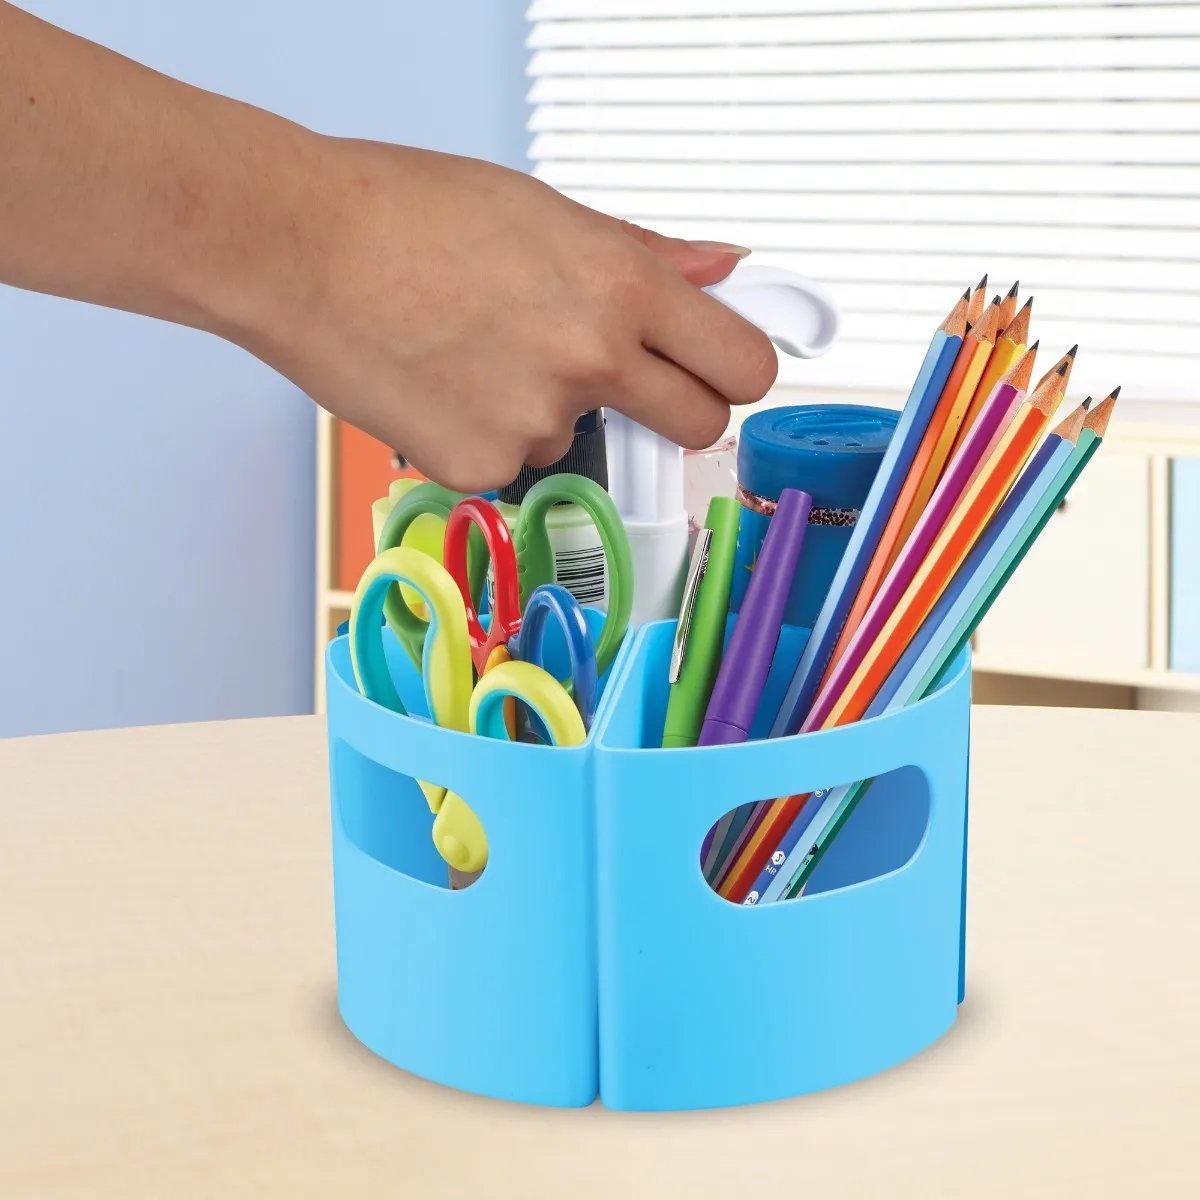 Create-a-Space™ Mini-Centre - Blue, Take creativity everywhere it takes you with a mini blue version of multicolour Create-A-Space Mini-Centre. Tidy, sort and store maker materials and move them wherever you need them.This easy-carry stationery storage organiser is ideal for classroom and home use.Three removable stationery storage compartments fit onto the easy-grip handle. The Create-A-Space Mini-Centre now in blue! This sturdy desk tidy brings an easy, convenient way to organise and present everyday bits